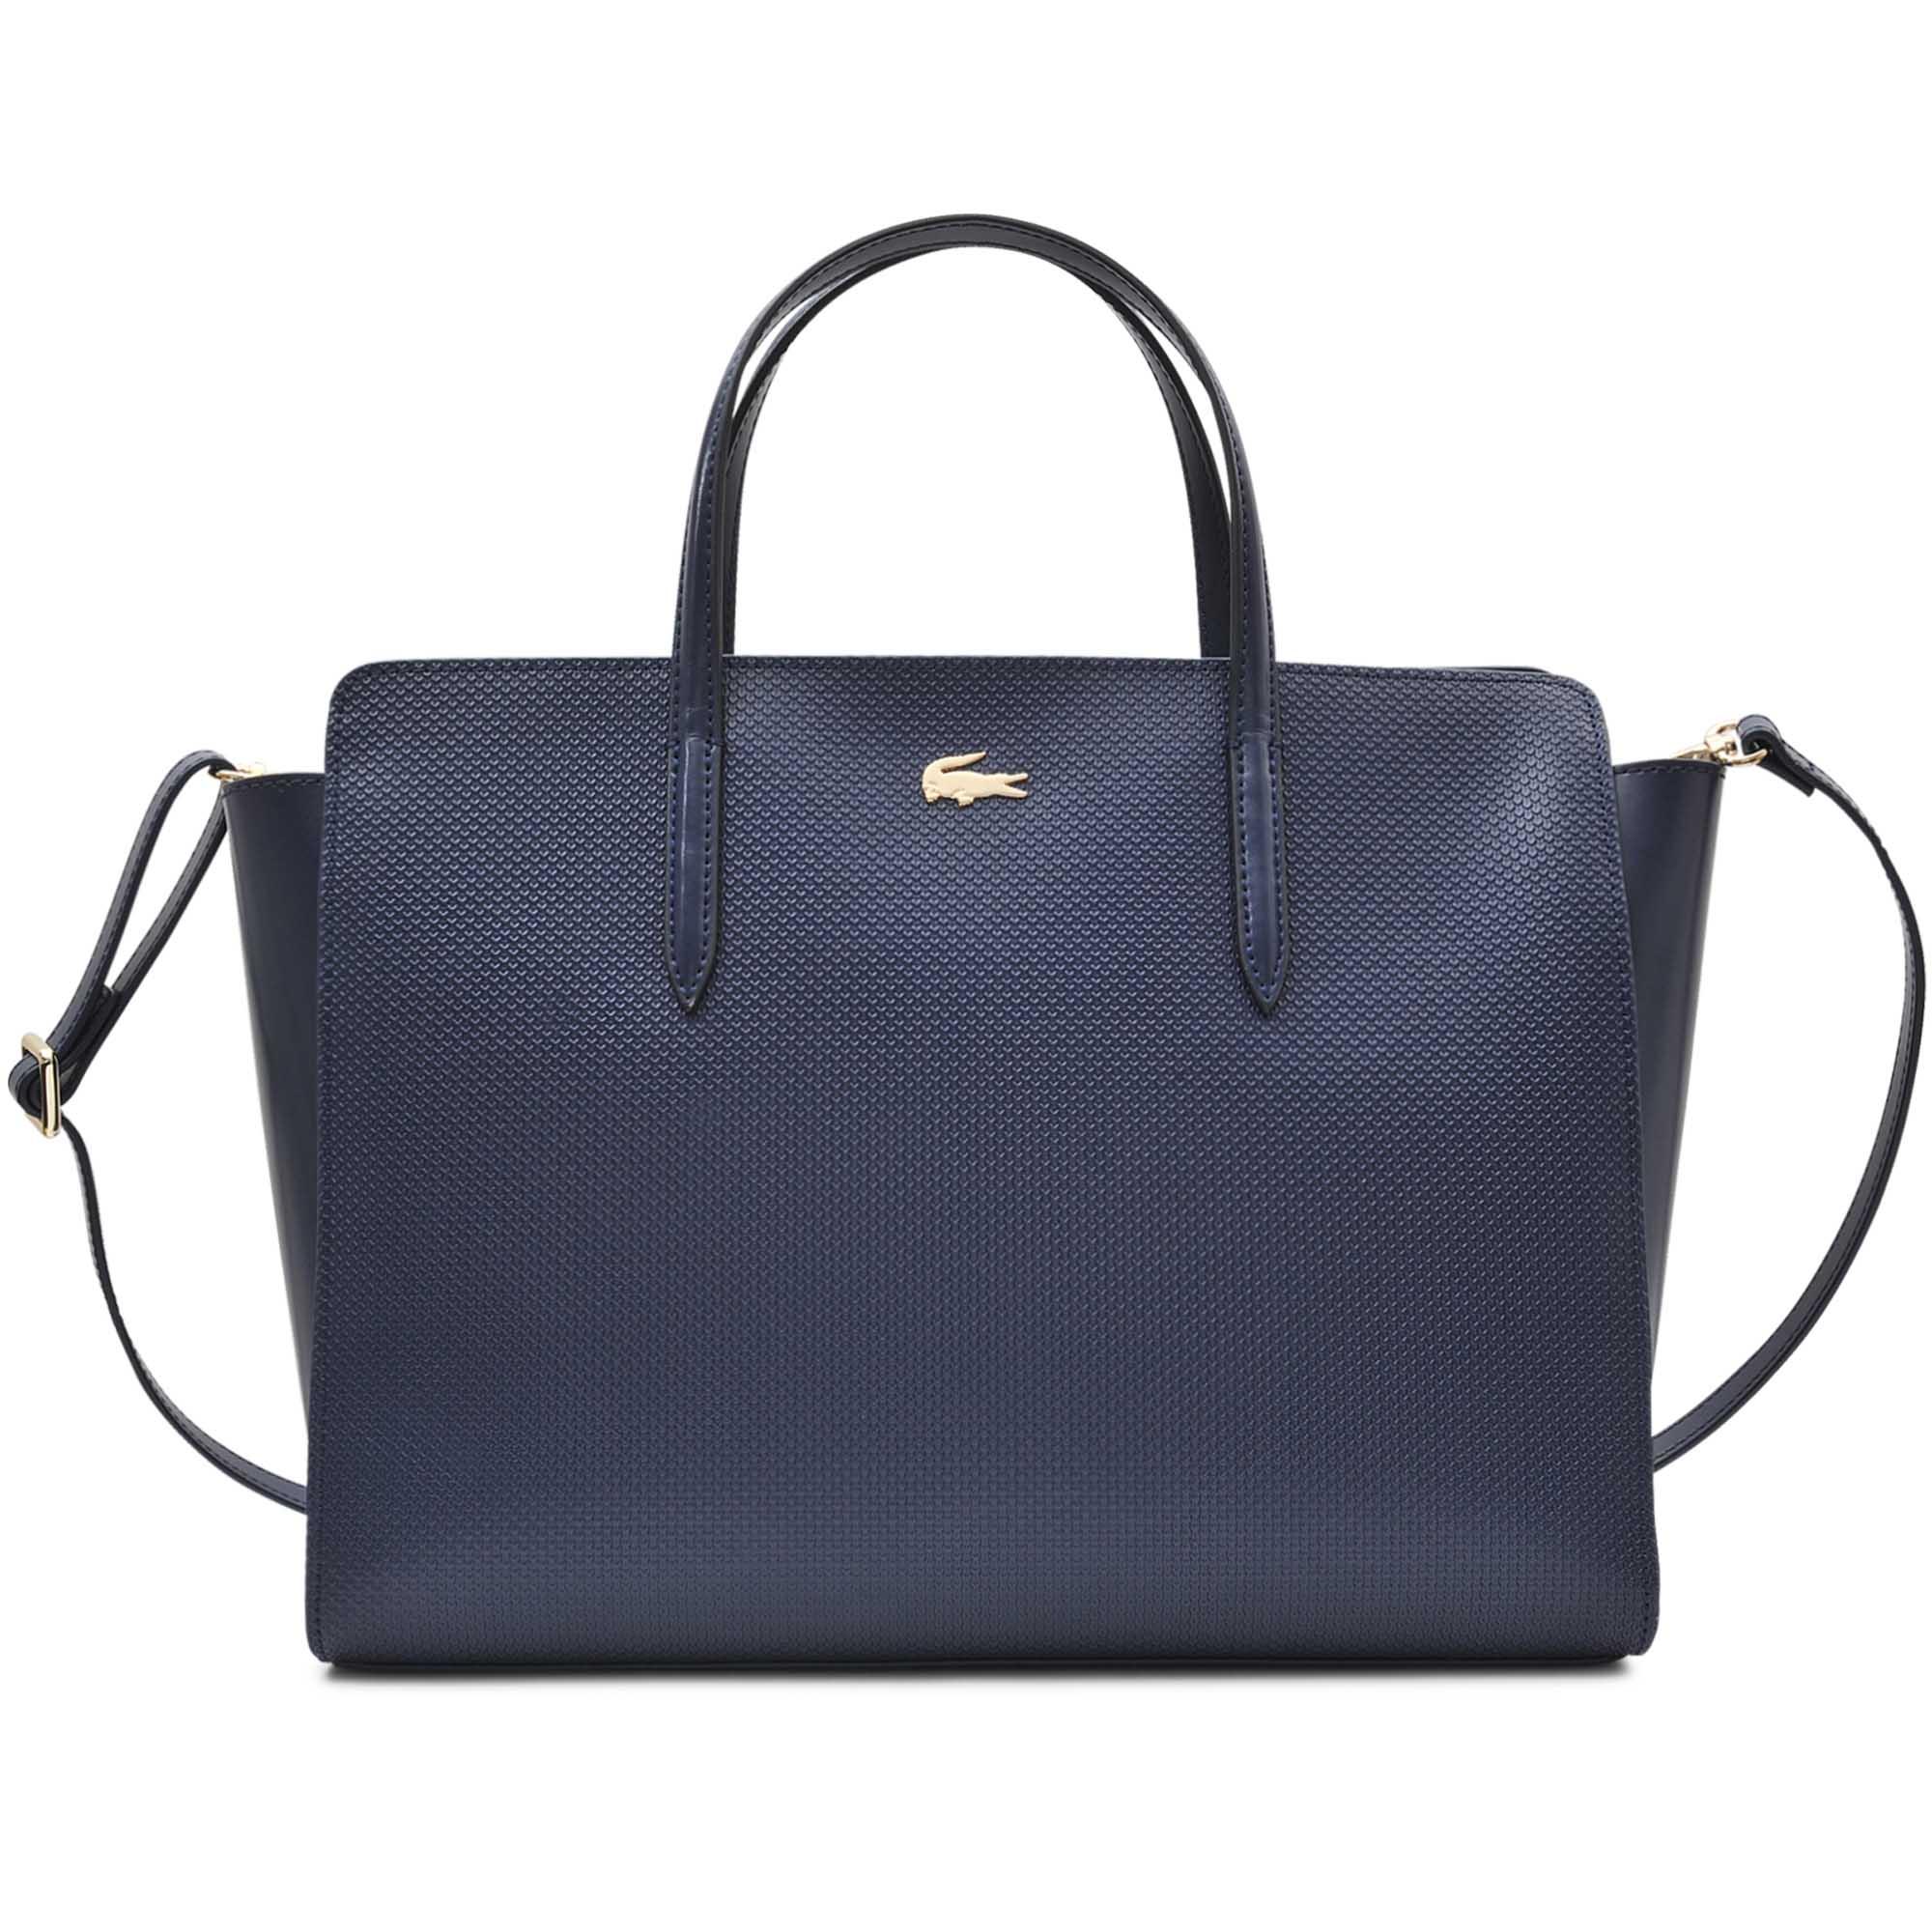 Lyst - Lacoste Chantaco Trapeze Bag in Blue